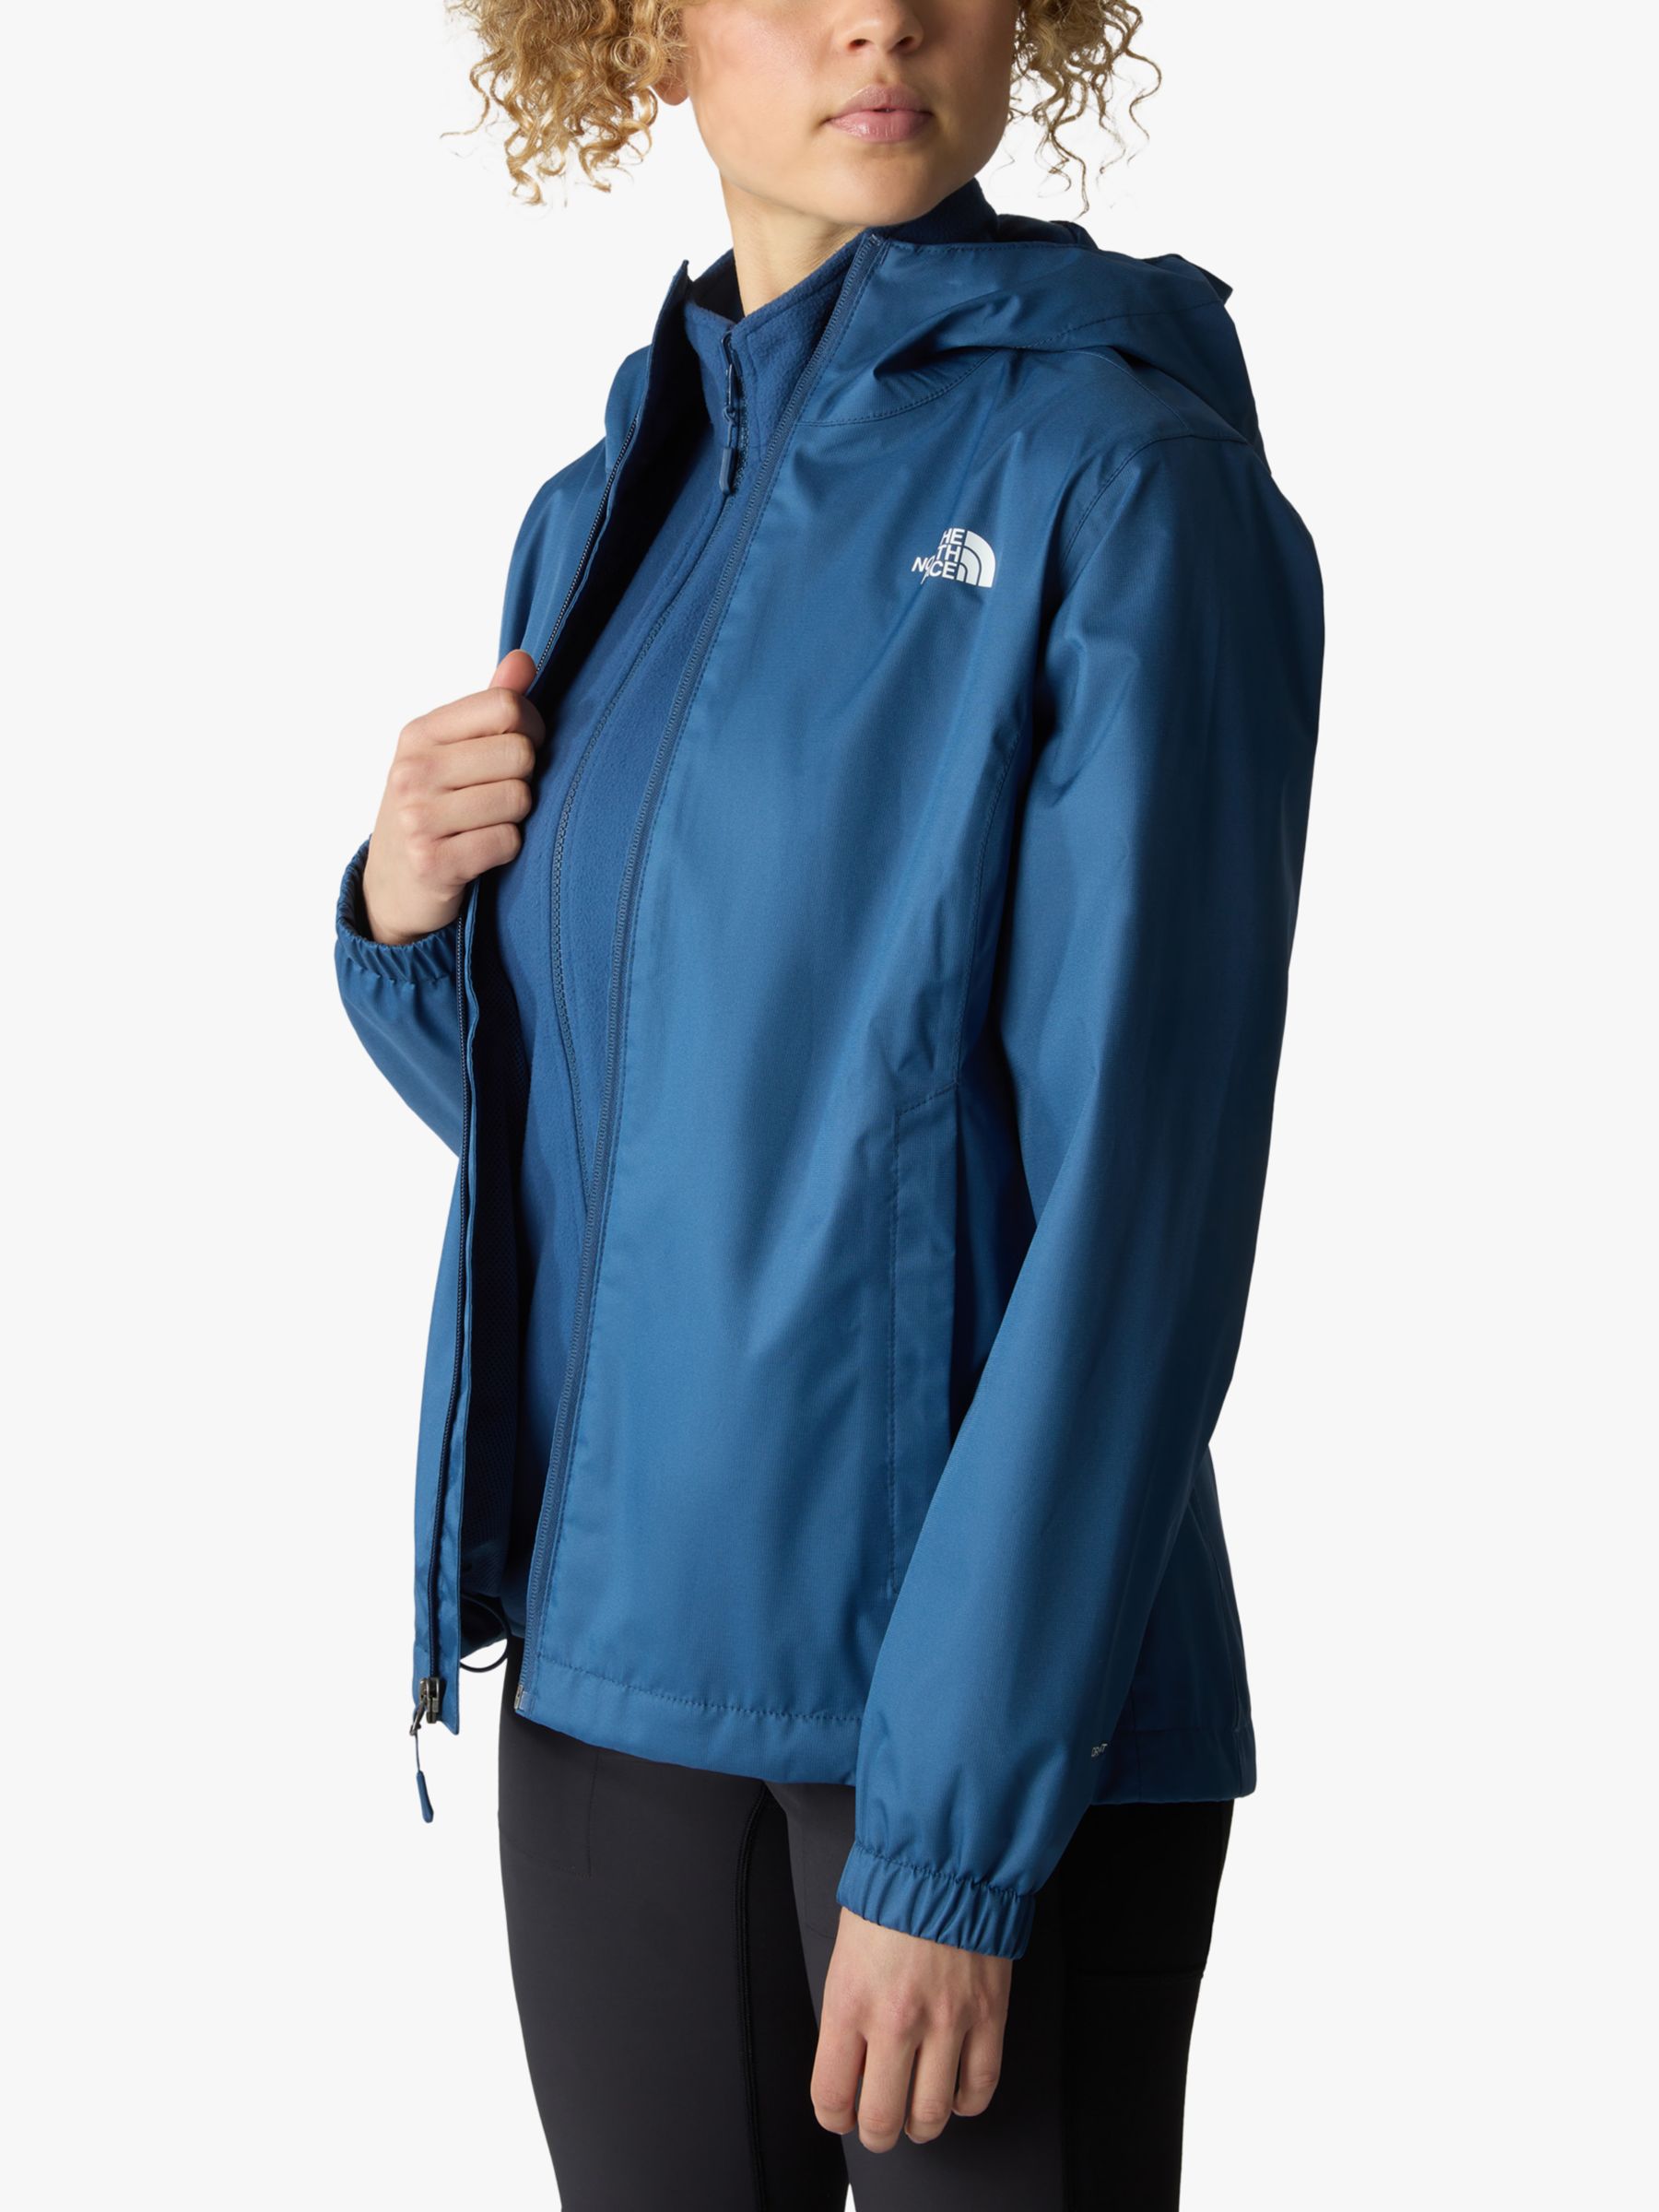 Buy The North Face Women's Quest Hooded Jacket Online at johnlewis.com